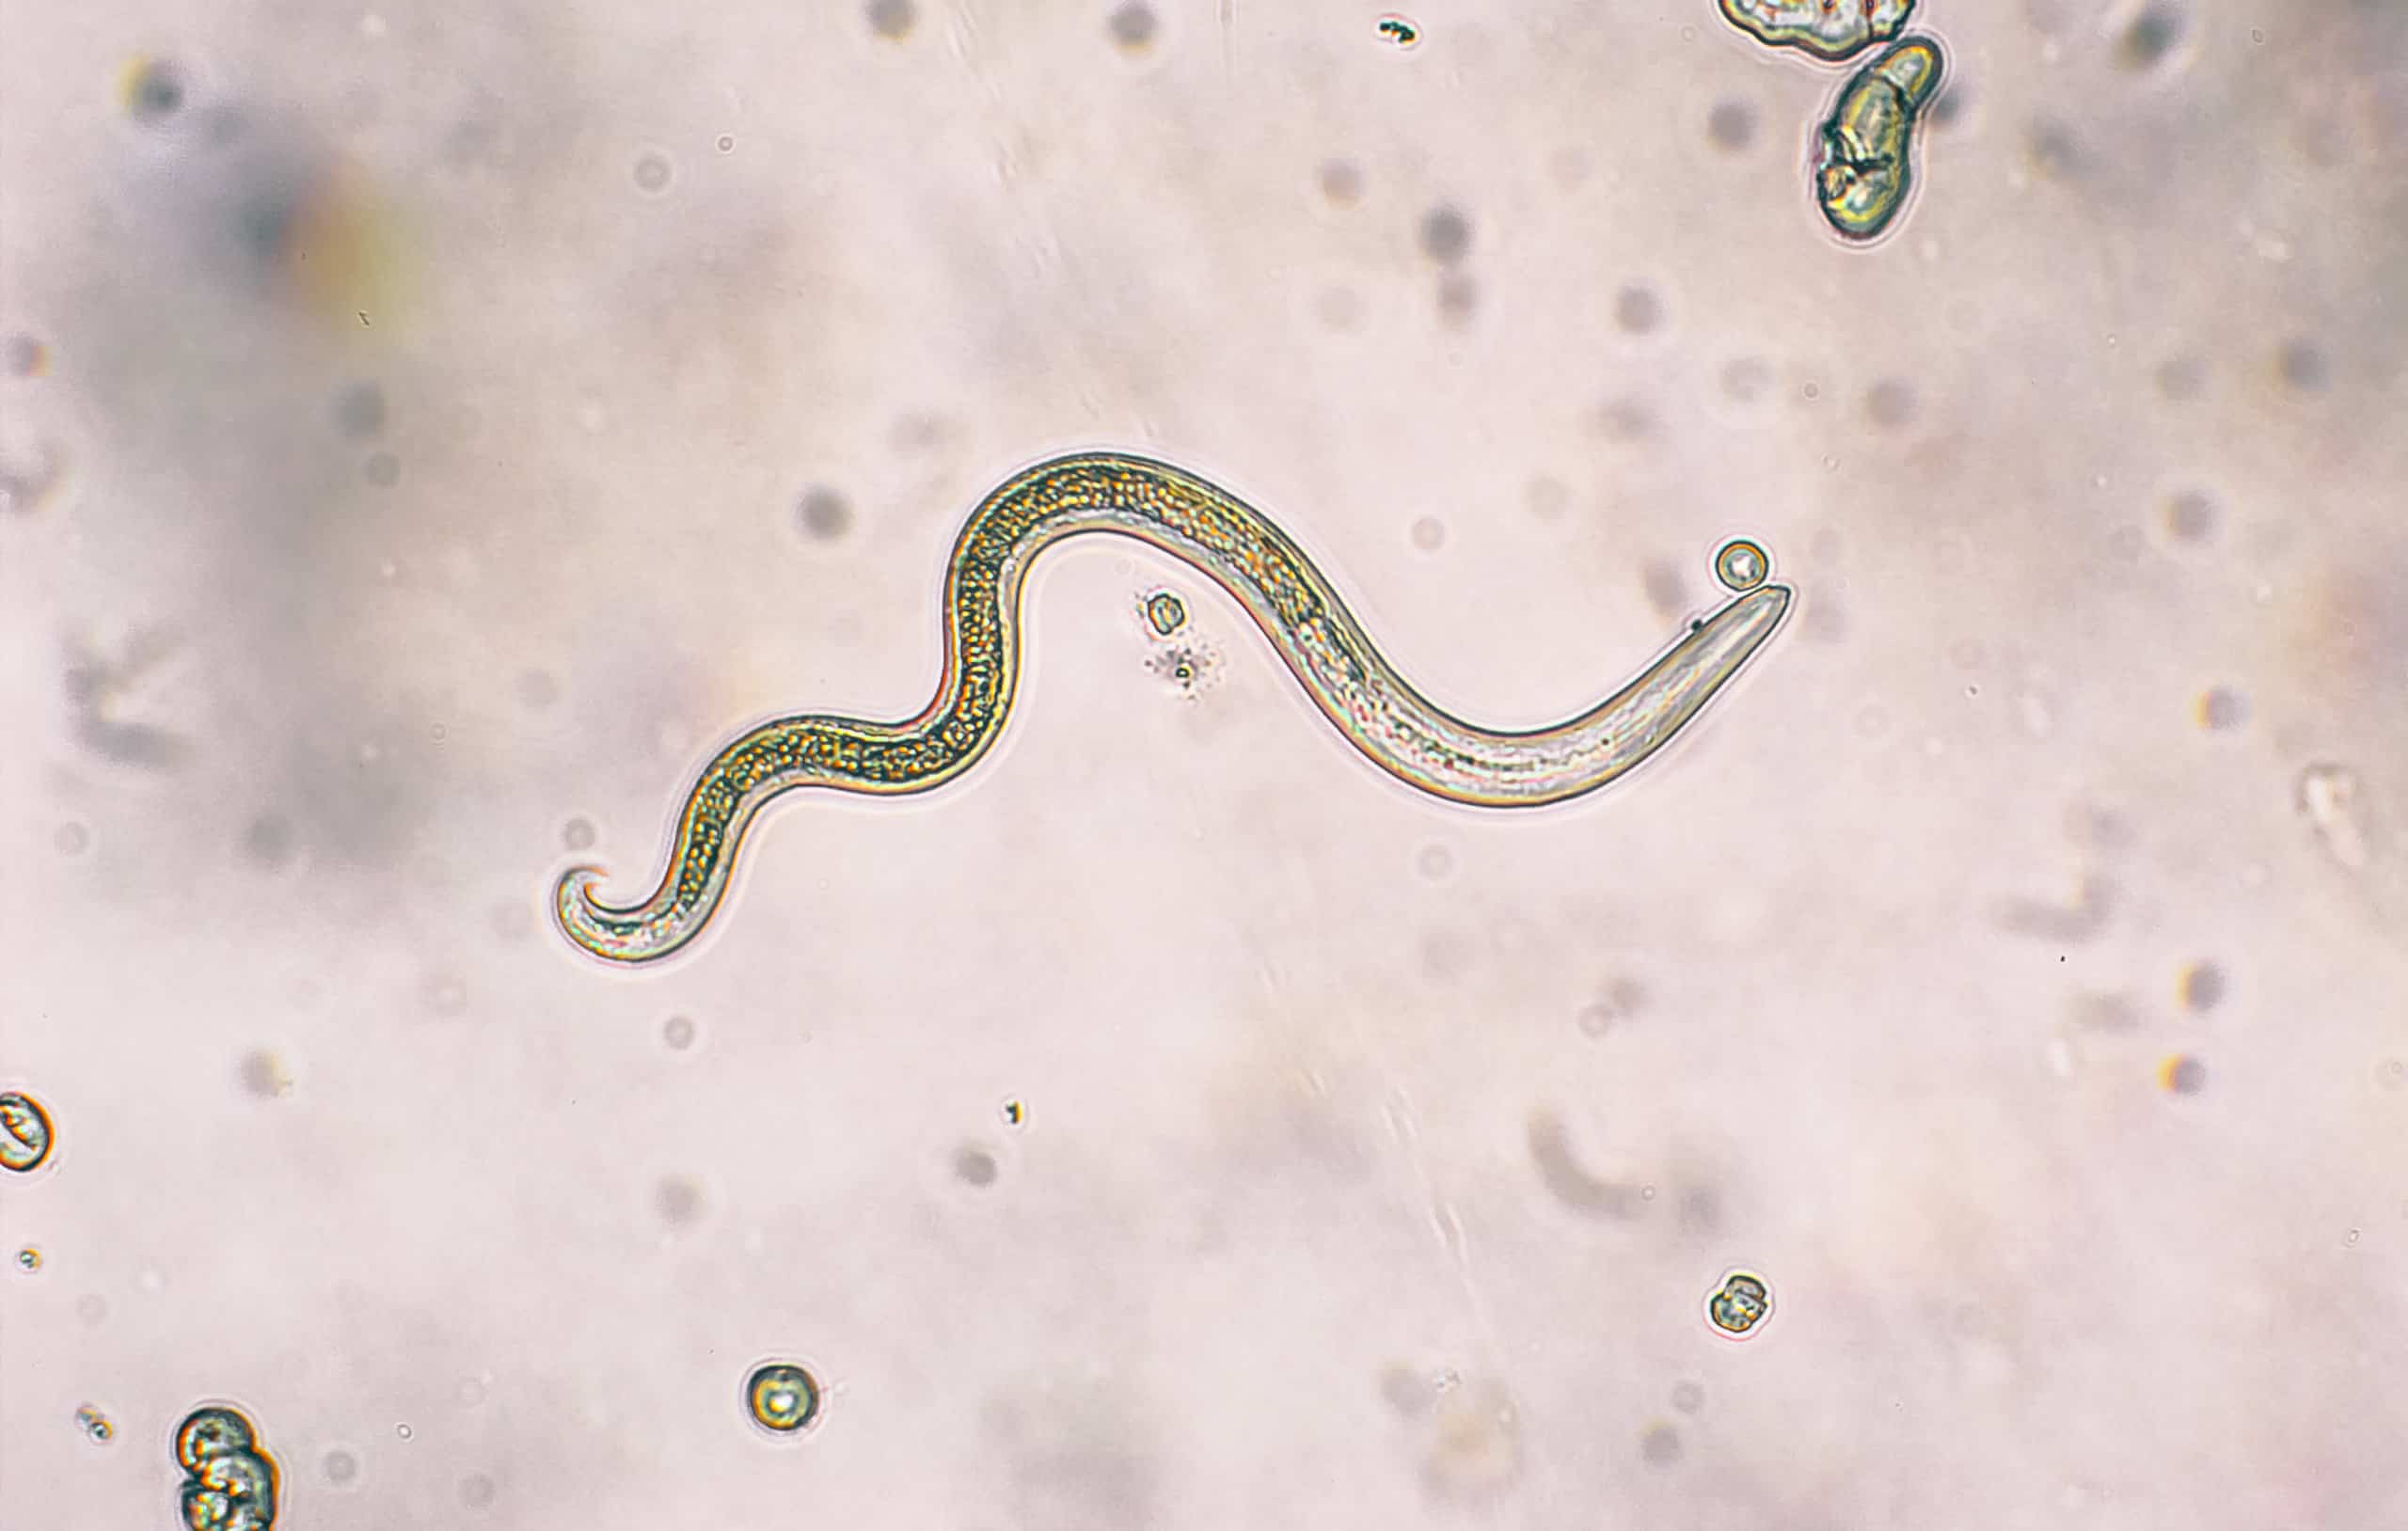 Toxocara canis (roundworm infection) second stage larvae hatch from eggs